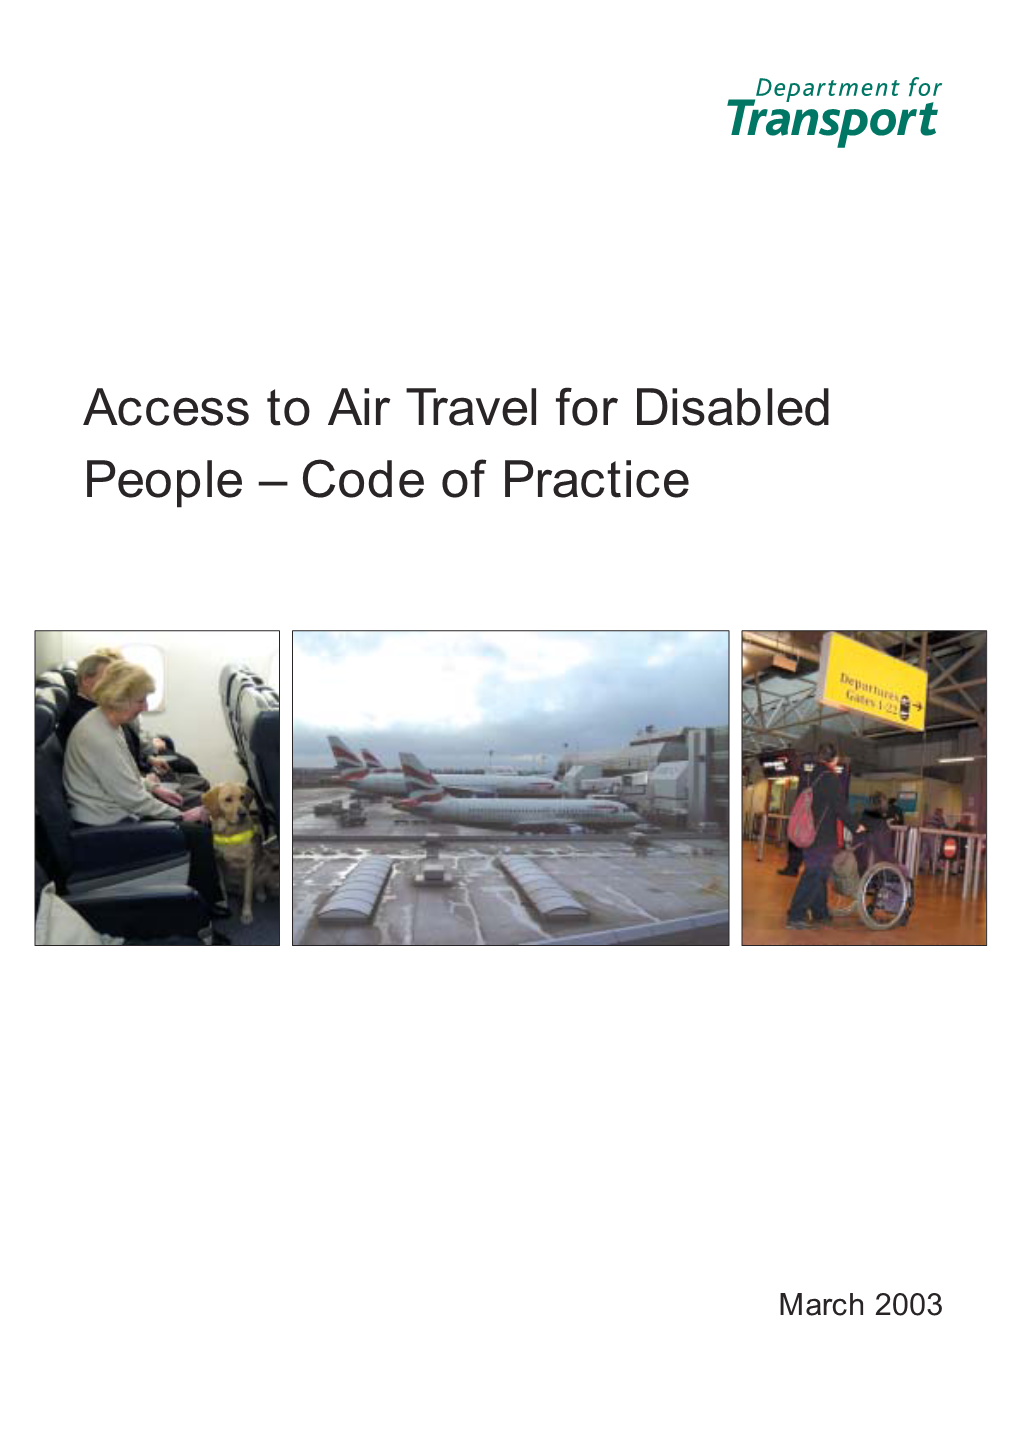 Access to Air Travel for Disabled People – Code of Practice